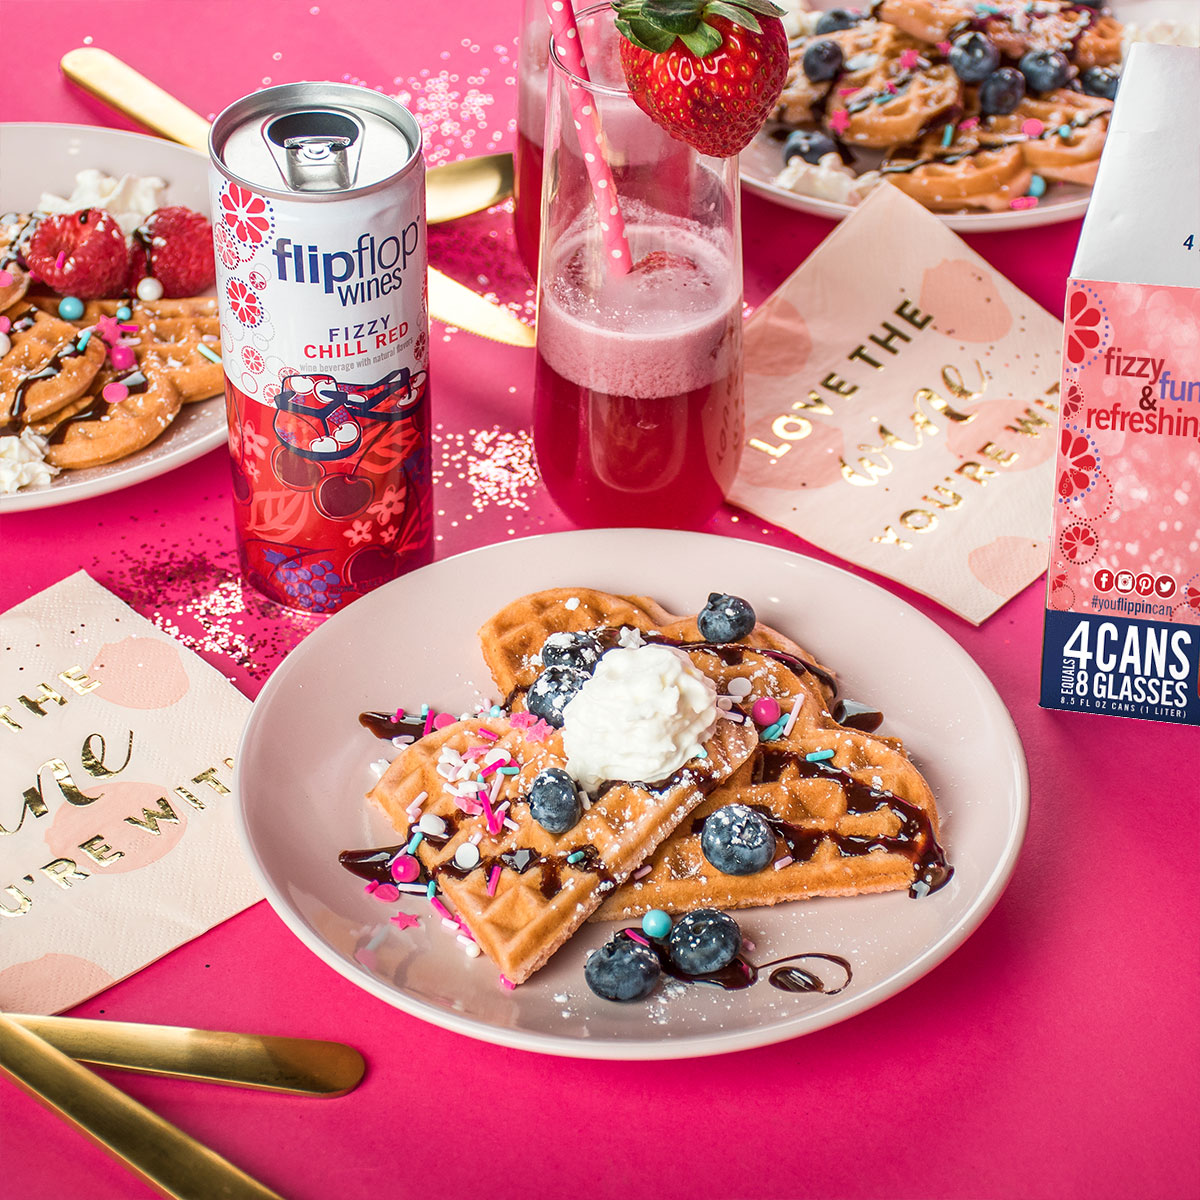 Heart-shaped waffles and flipflop fizzy chill red